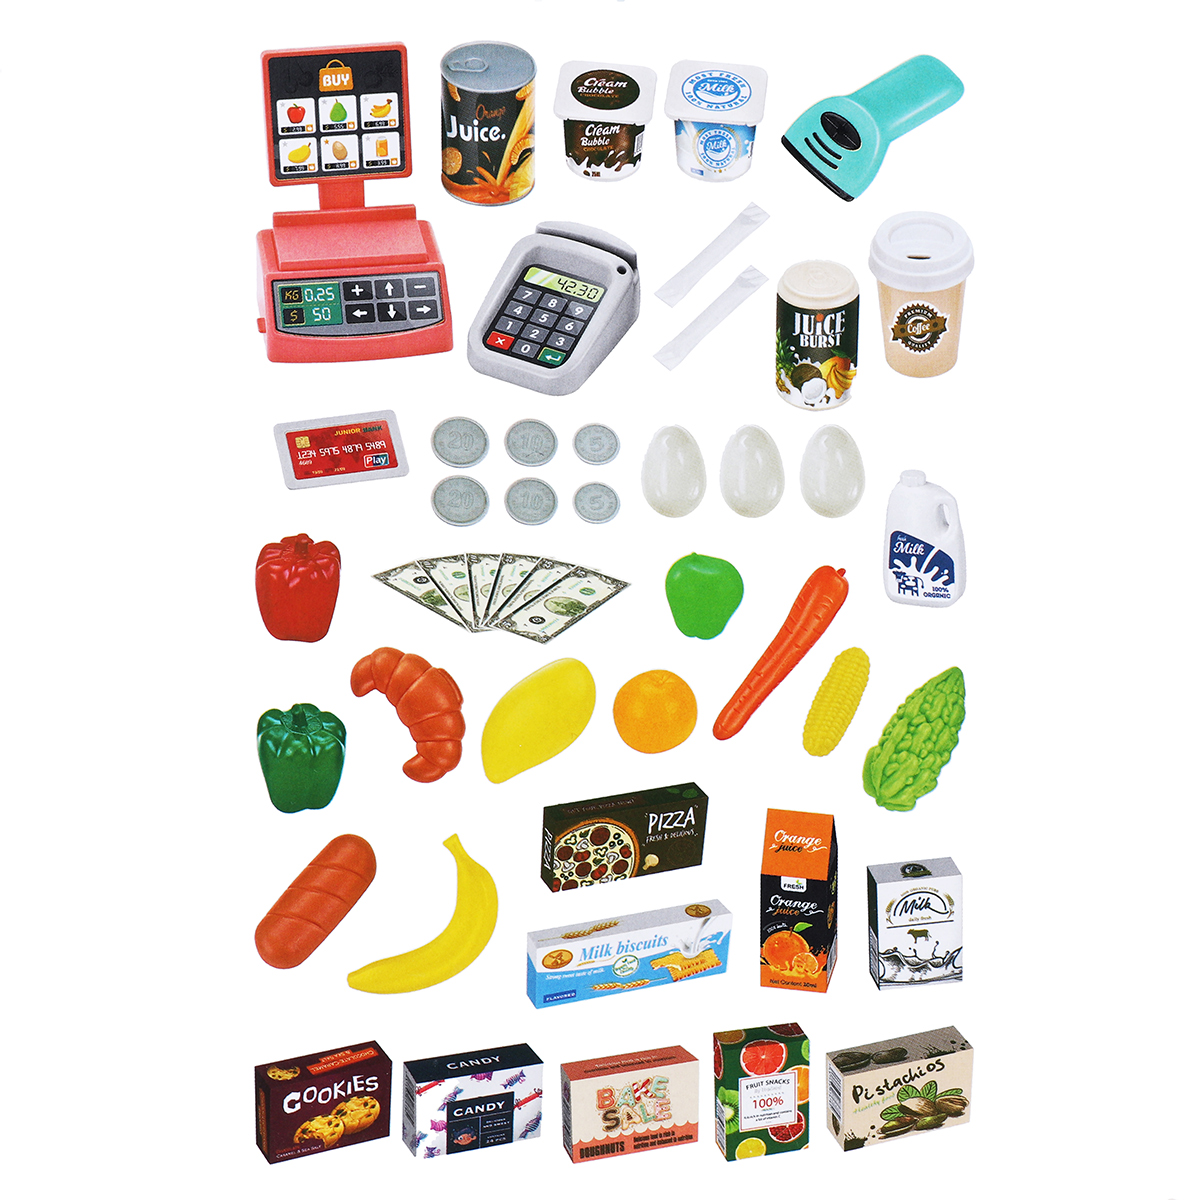 Children-Play-House-Kitchen-Simulation-Toys-Scanner-Credit-Card-Machine-Trolley-Shopping-Trolley-Cas-1635566-10